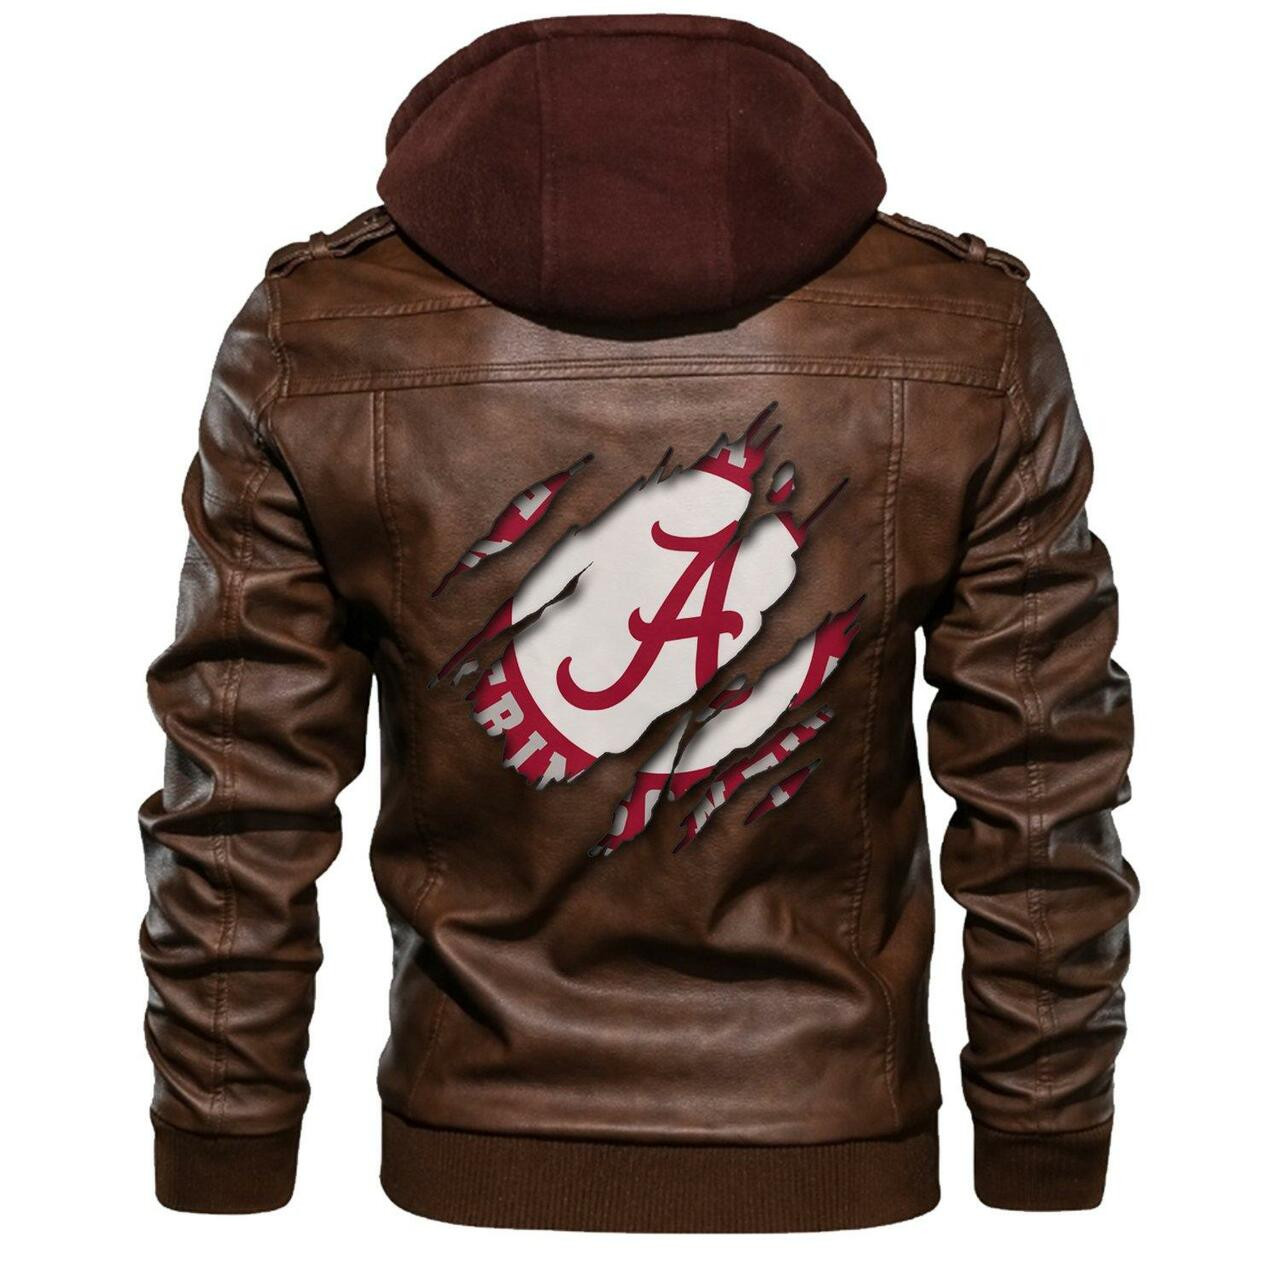 To get a great look, consider purchasing This New Leather Jacket 123